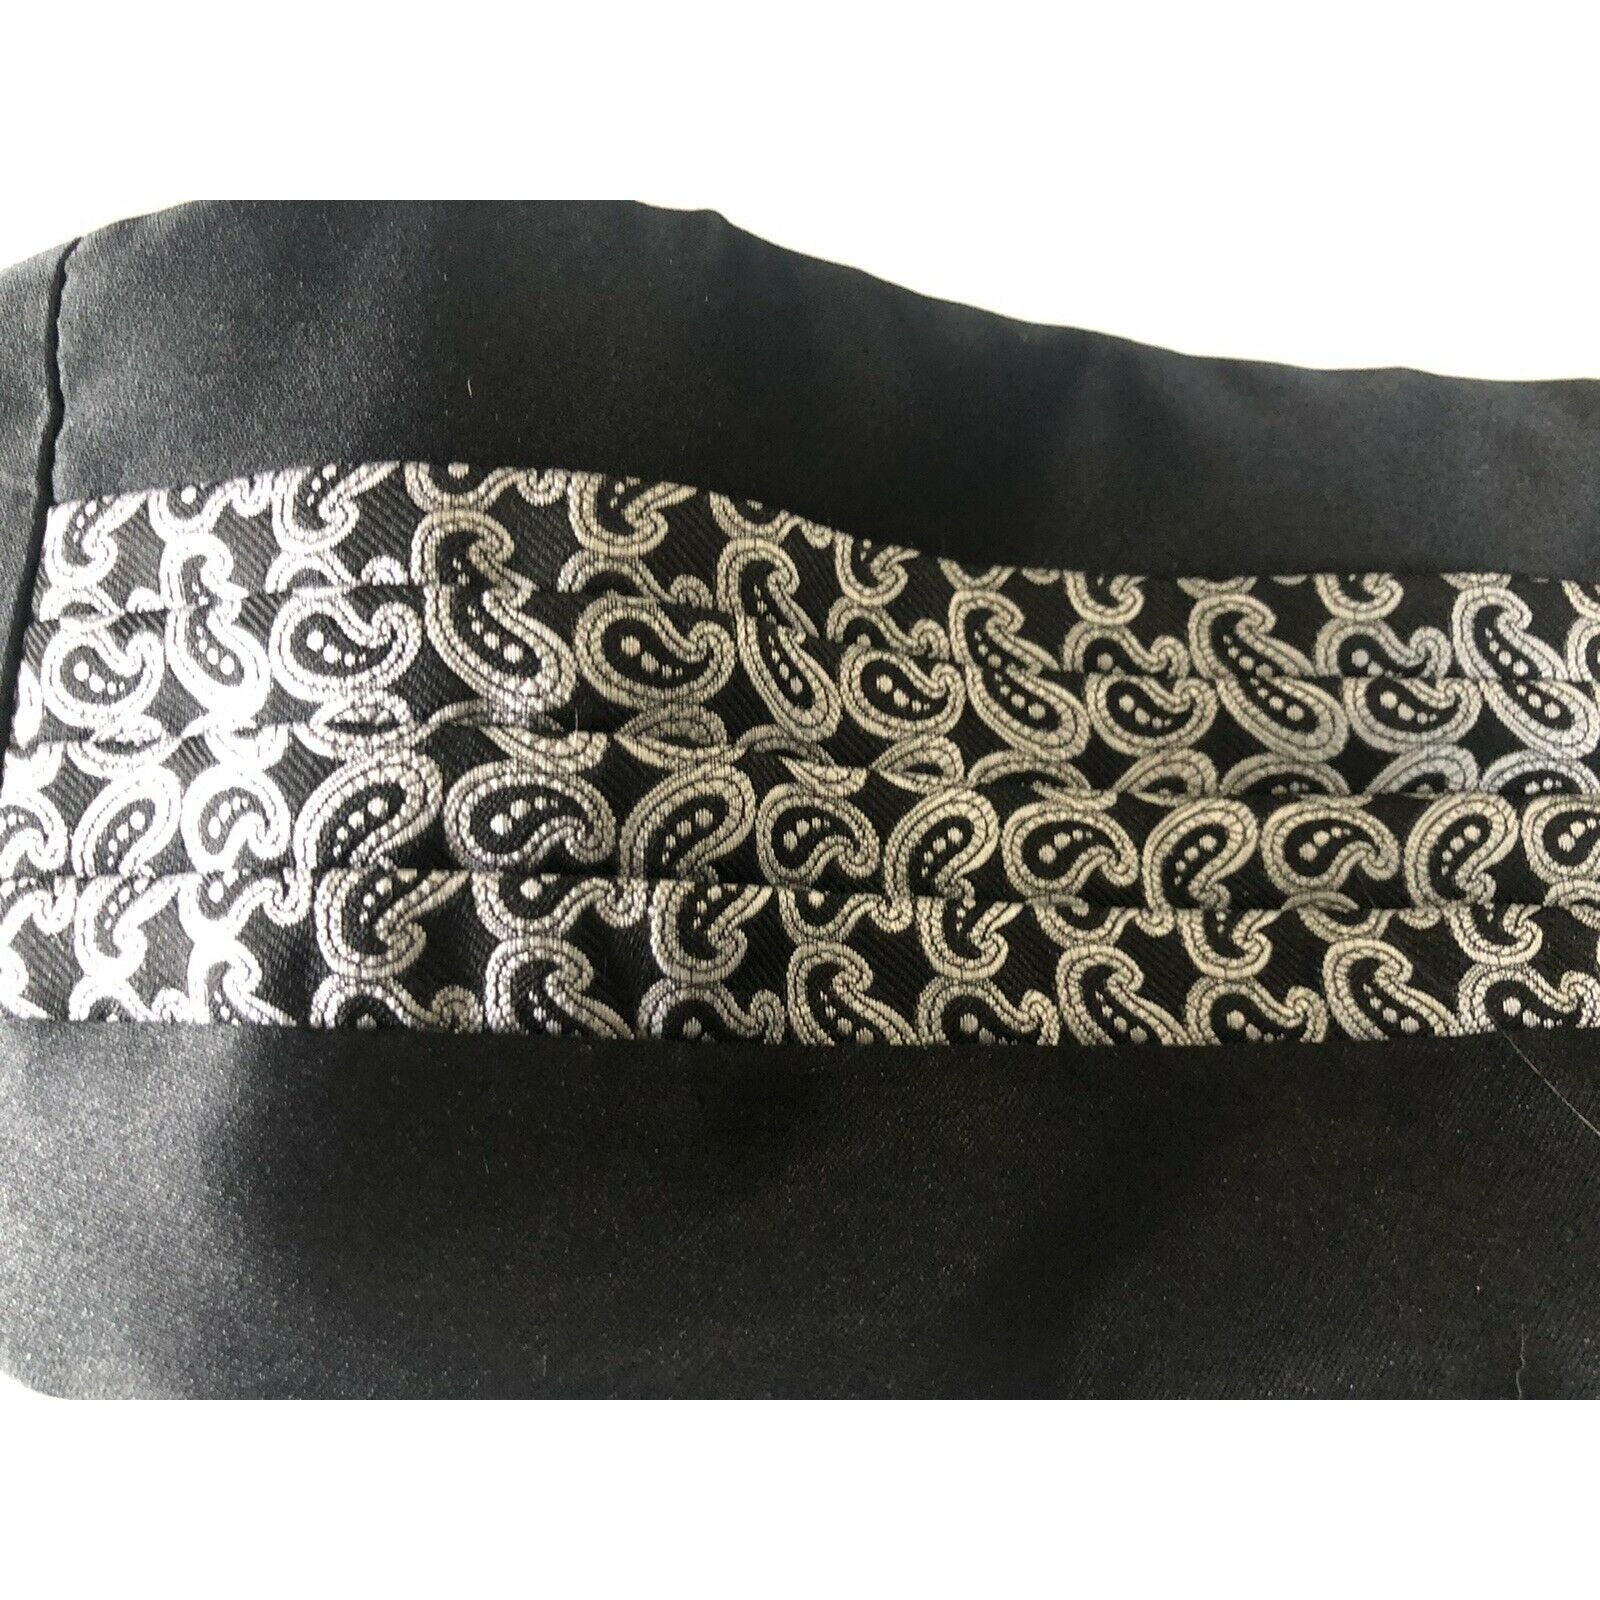 Lord & Taylor LORD WEST USA Men’s Paisley Formal Cummerbund & Bow Size ONE SIZE - 3 Thumbnail